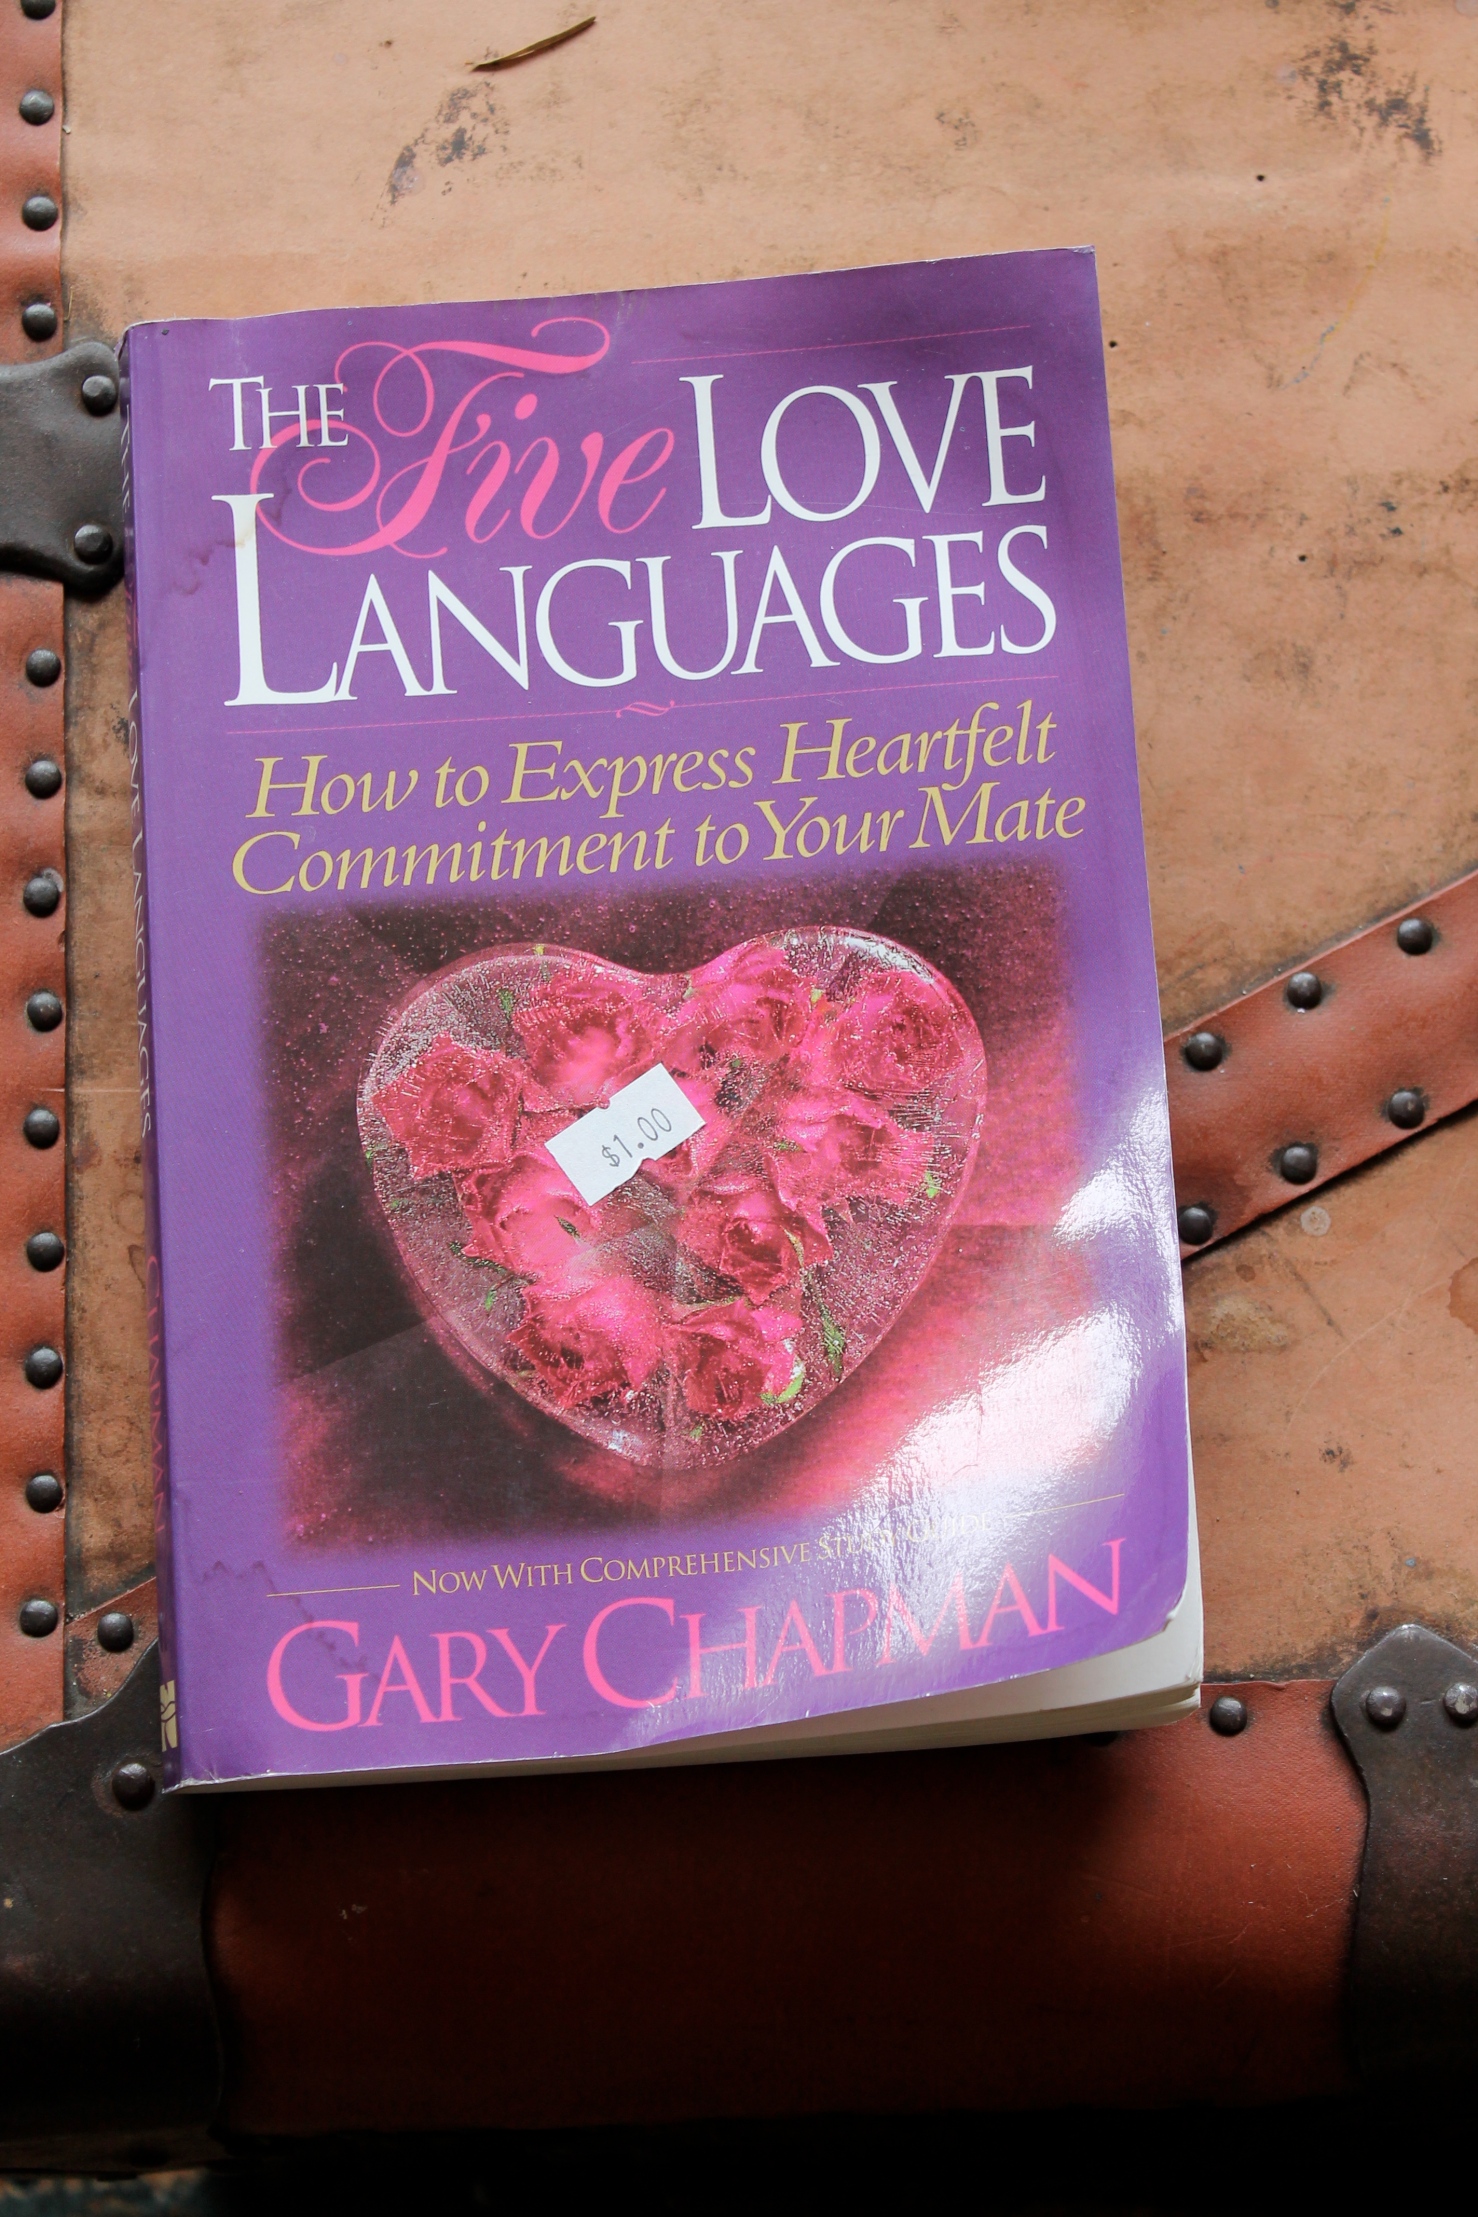 book review the five love languages